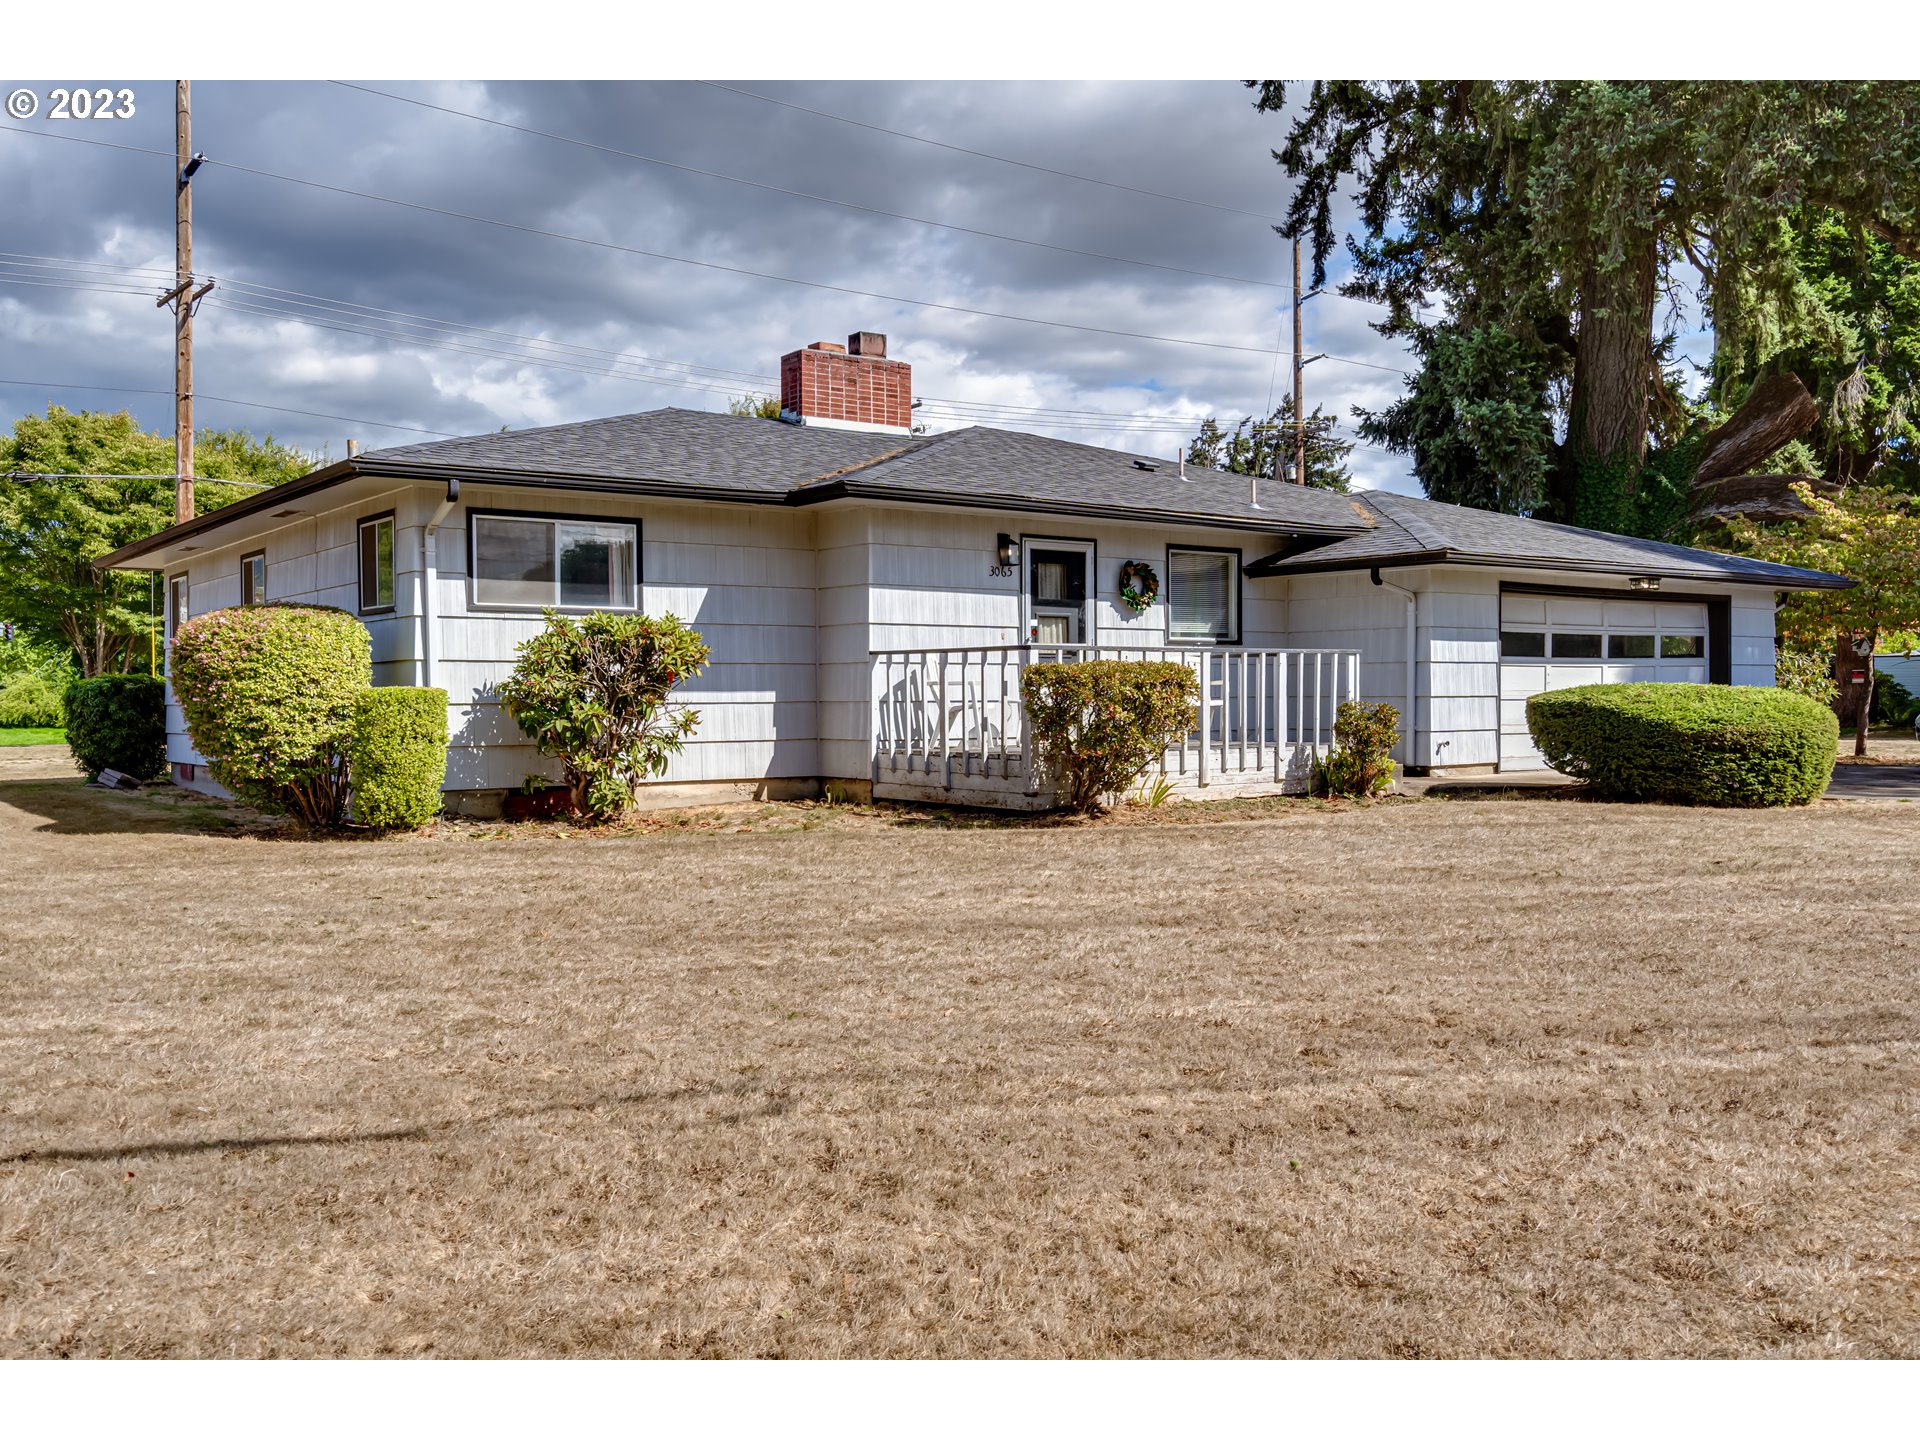 Ideal location & so many possibilities! Rare mixed use commercial/residential zoned property with .64 acres of open and level space to create! Solid vintage 1959 2 bed, 1 bath home offering 1421 sq. ft. with den and 2 car garage +/RV parking. Half mile to Peace Health/River Bend and less than 1 mile to gateway/I5. Eugene 4J Schools.